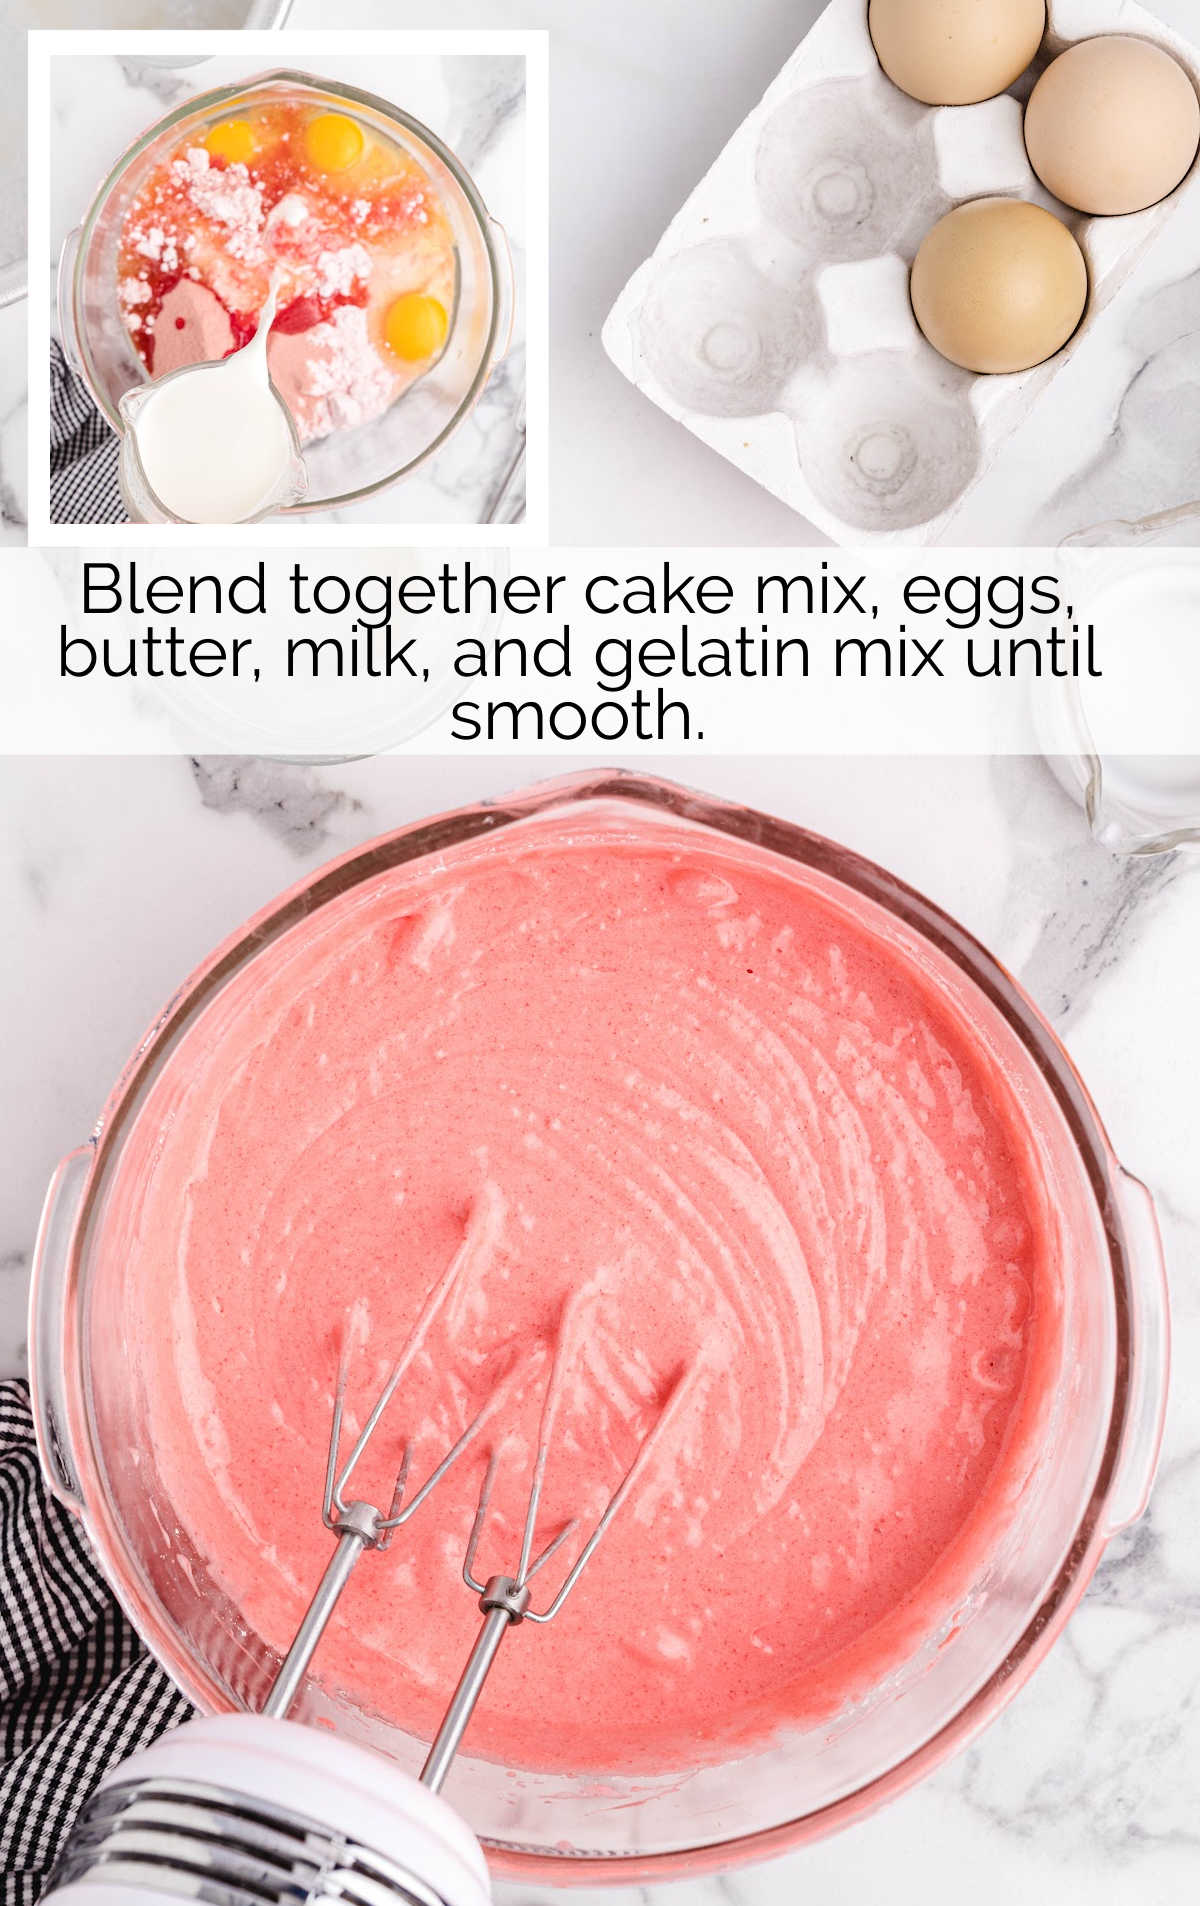 cake mix, eggs, butter, milk, and gelatin blended in a bowl